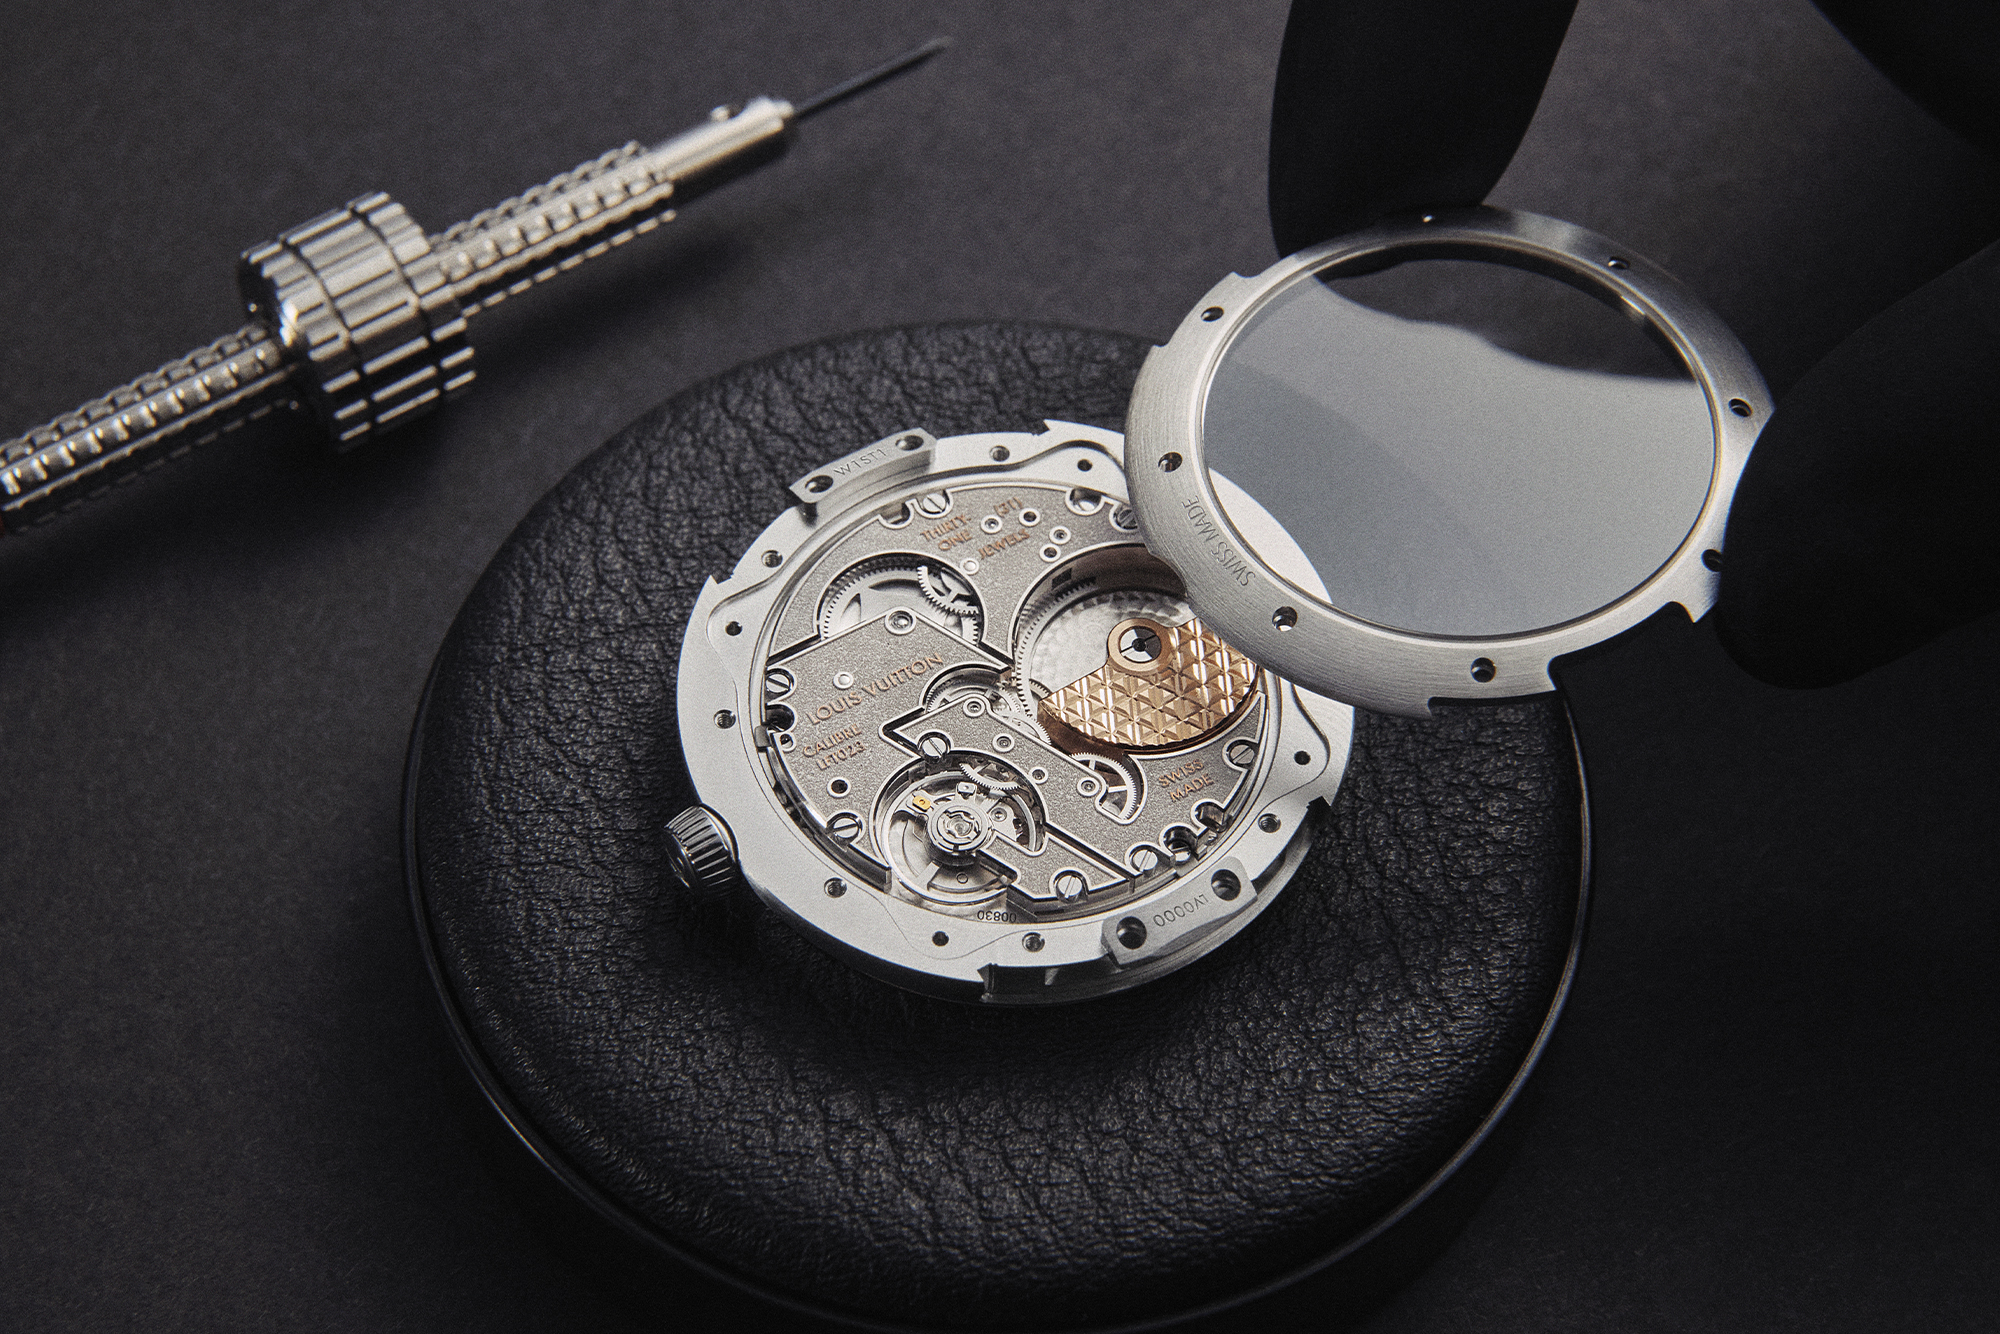 Louis Vuitton Tambour putting the glass on the back of the dial